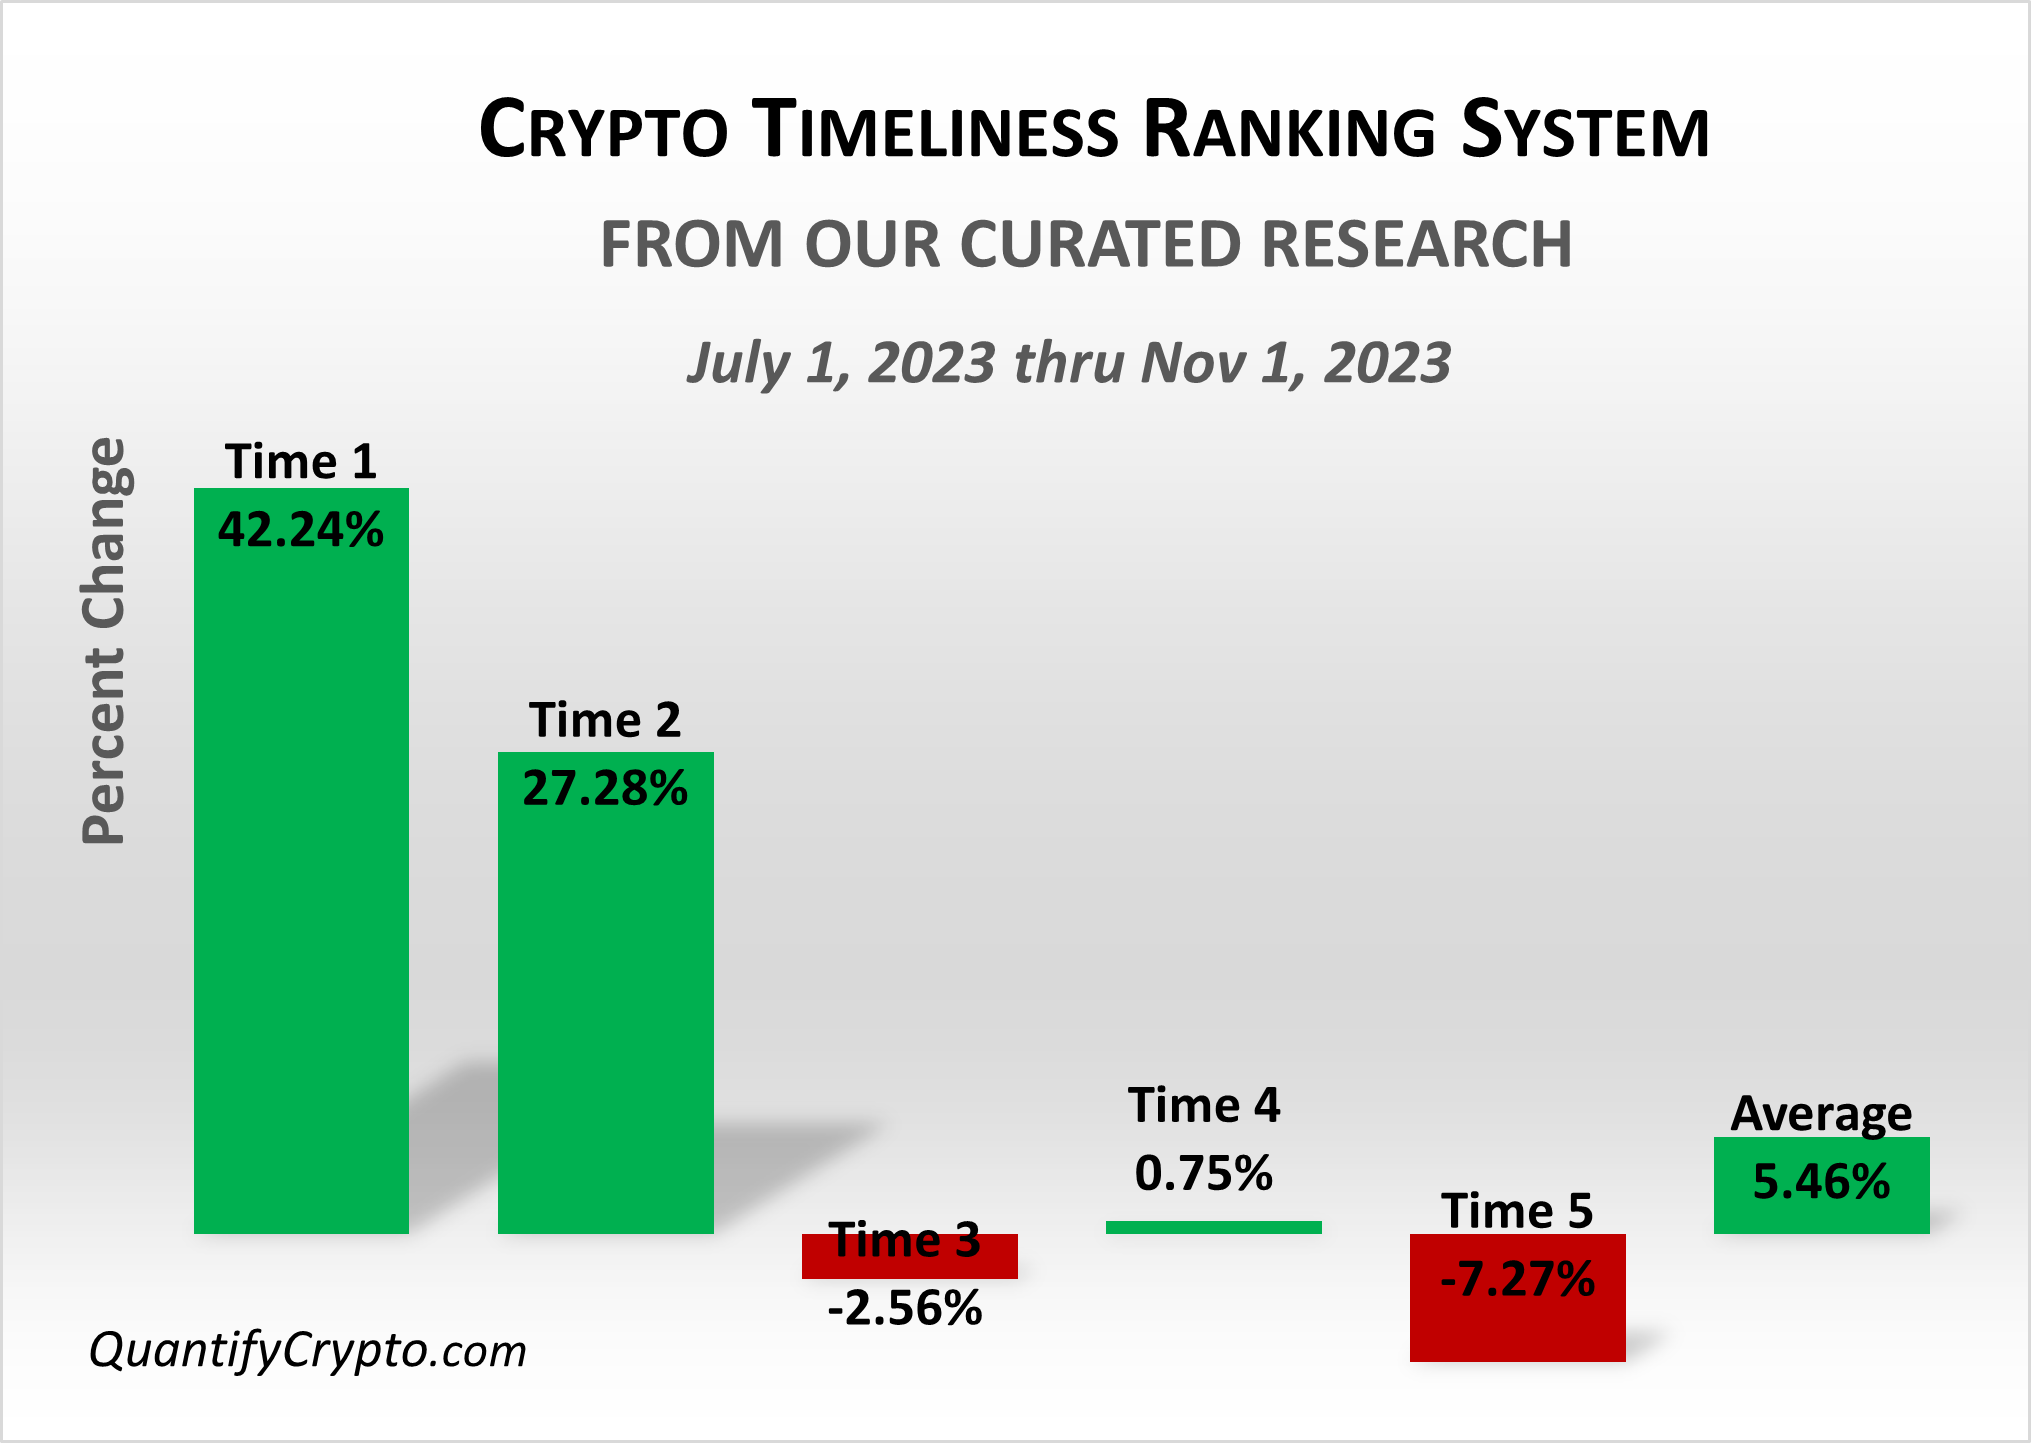 Technical Analysis Chart of Quantify Crypto Performance